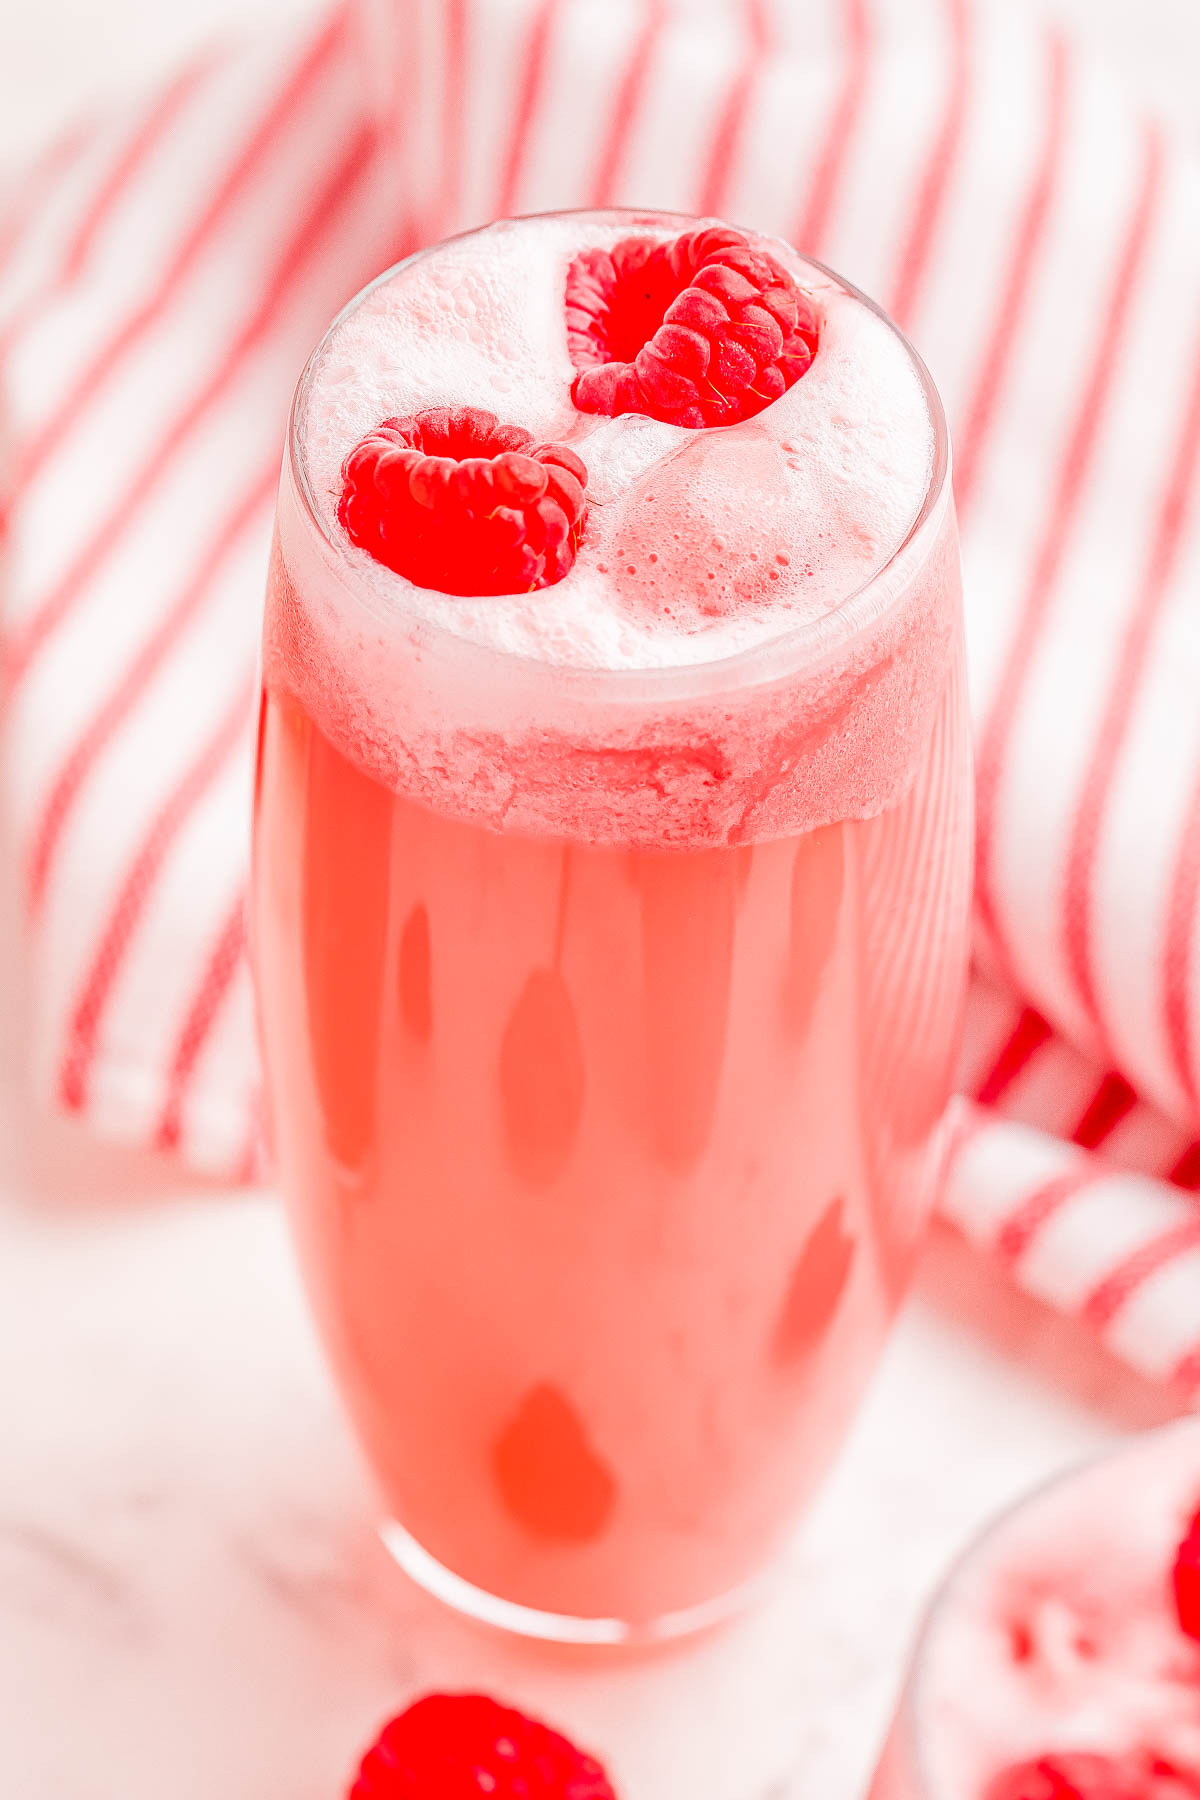 A tall glass filled with a frothy pink beverage, garnished with fresh raspberries. A red and white striped cloth is visible in the background.